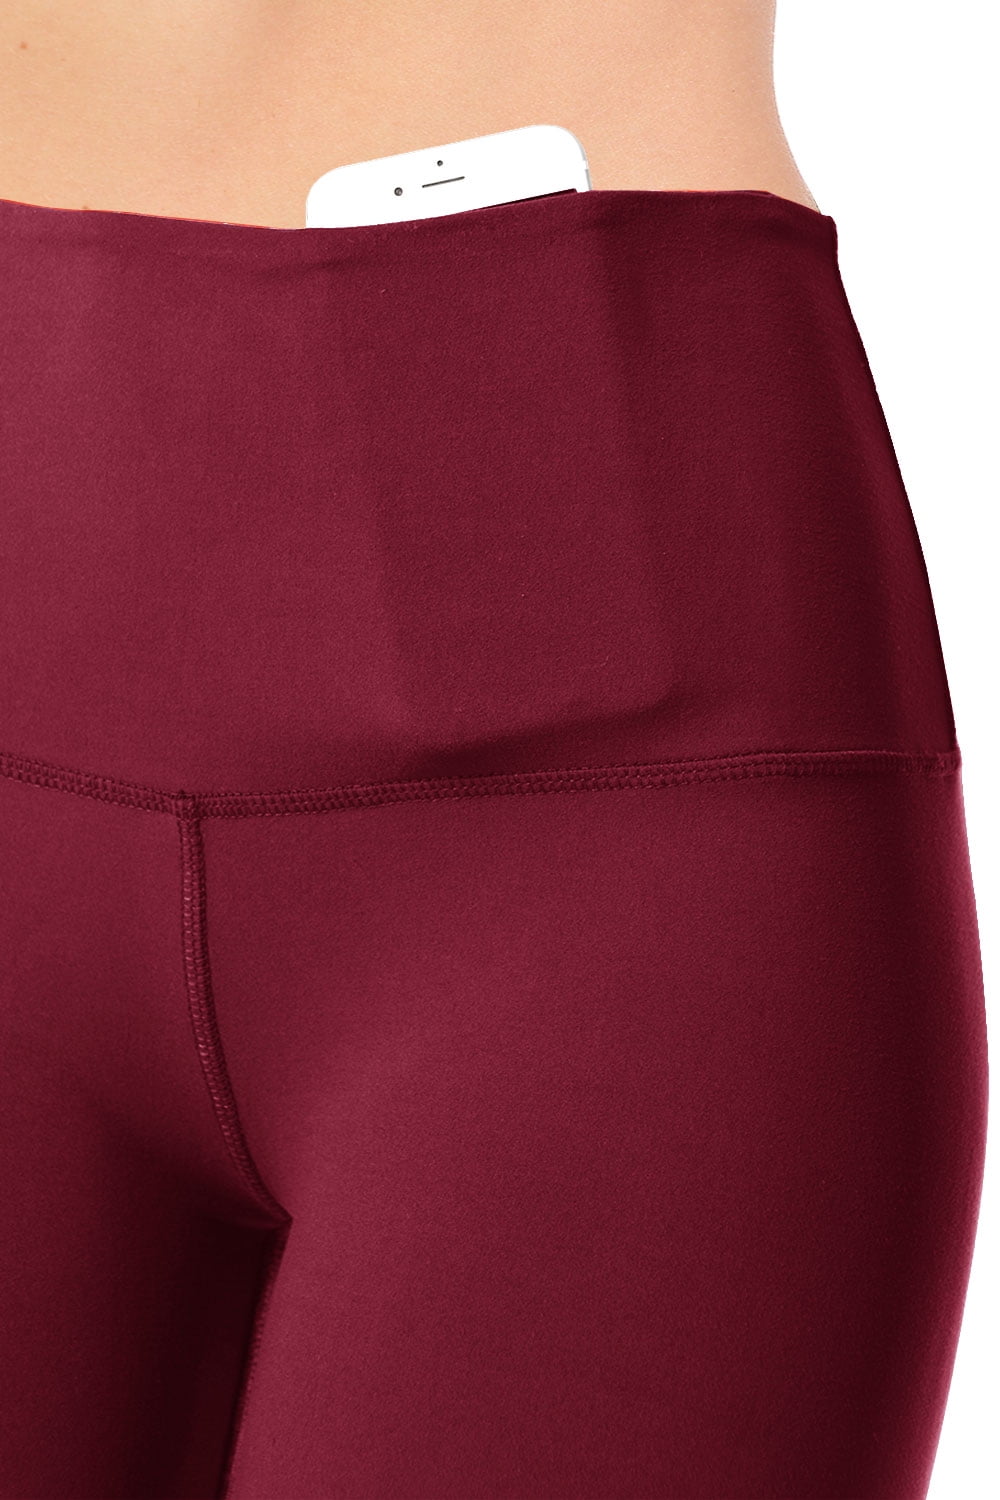 VIV Collection Signature Leggings Yoga Waistband Soft and Tension w/Hidden  Pocket (XXL, Red) 